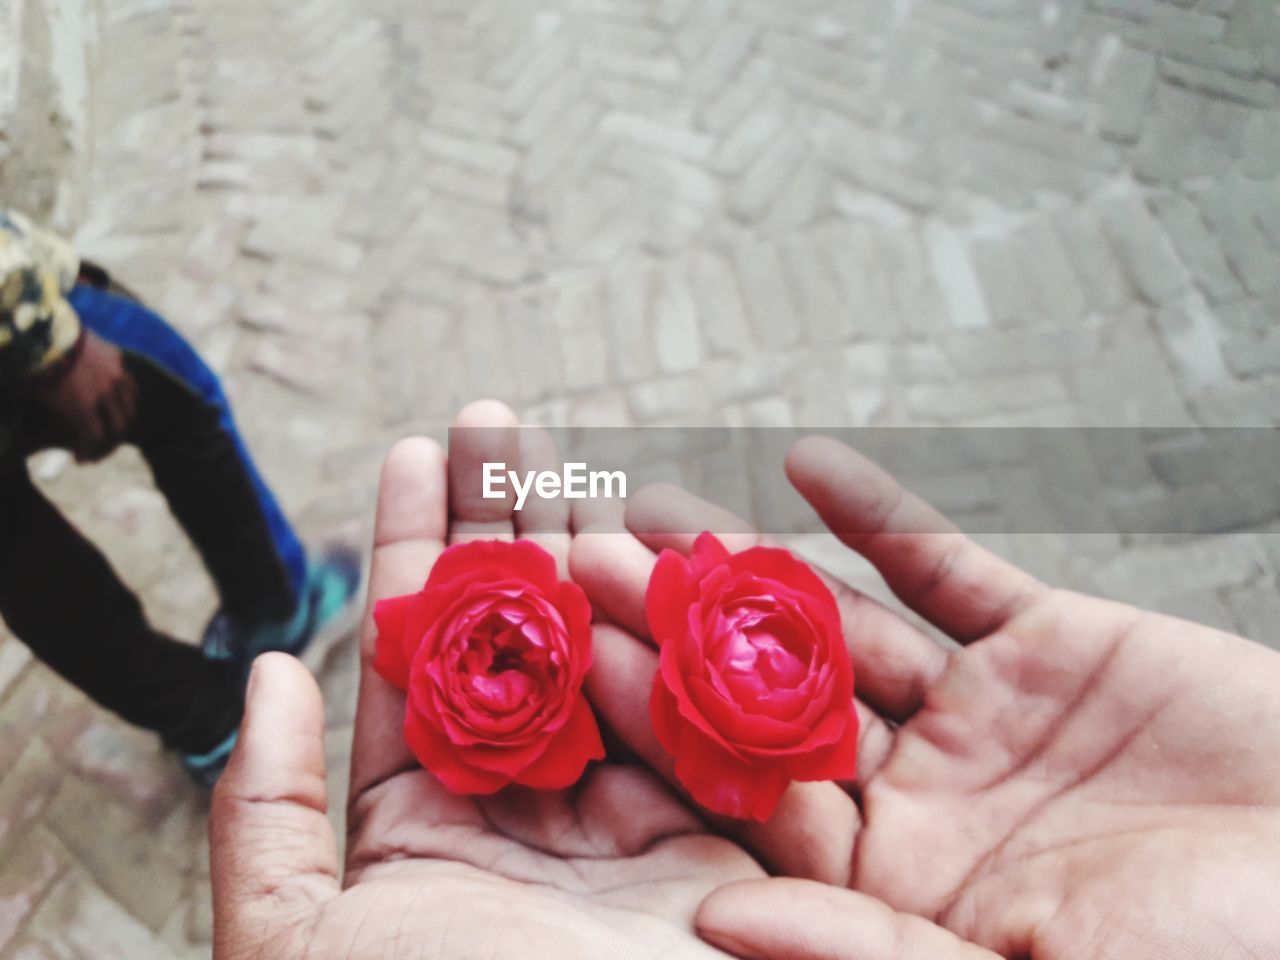 Cropped image of hand holding red rose